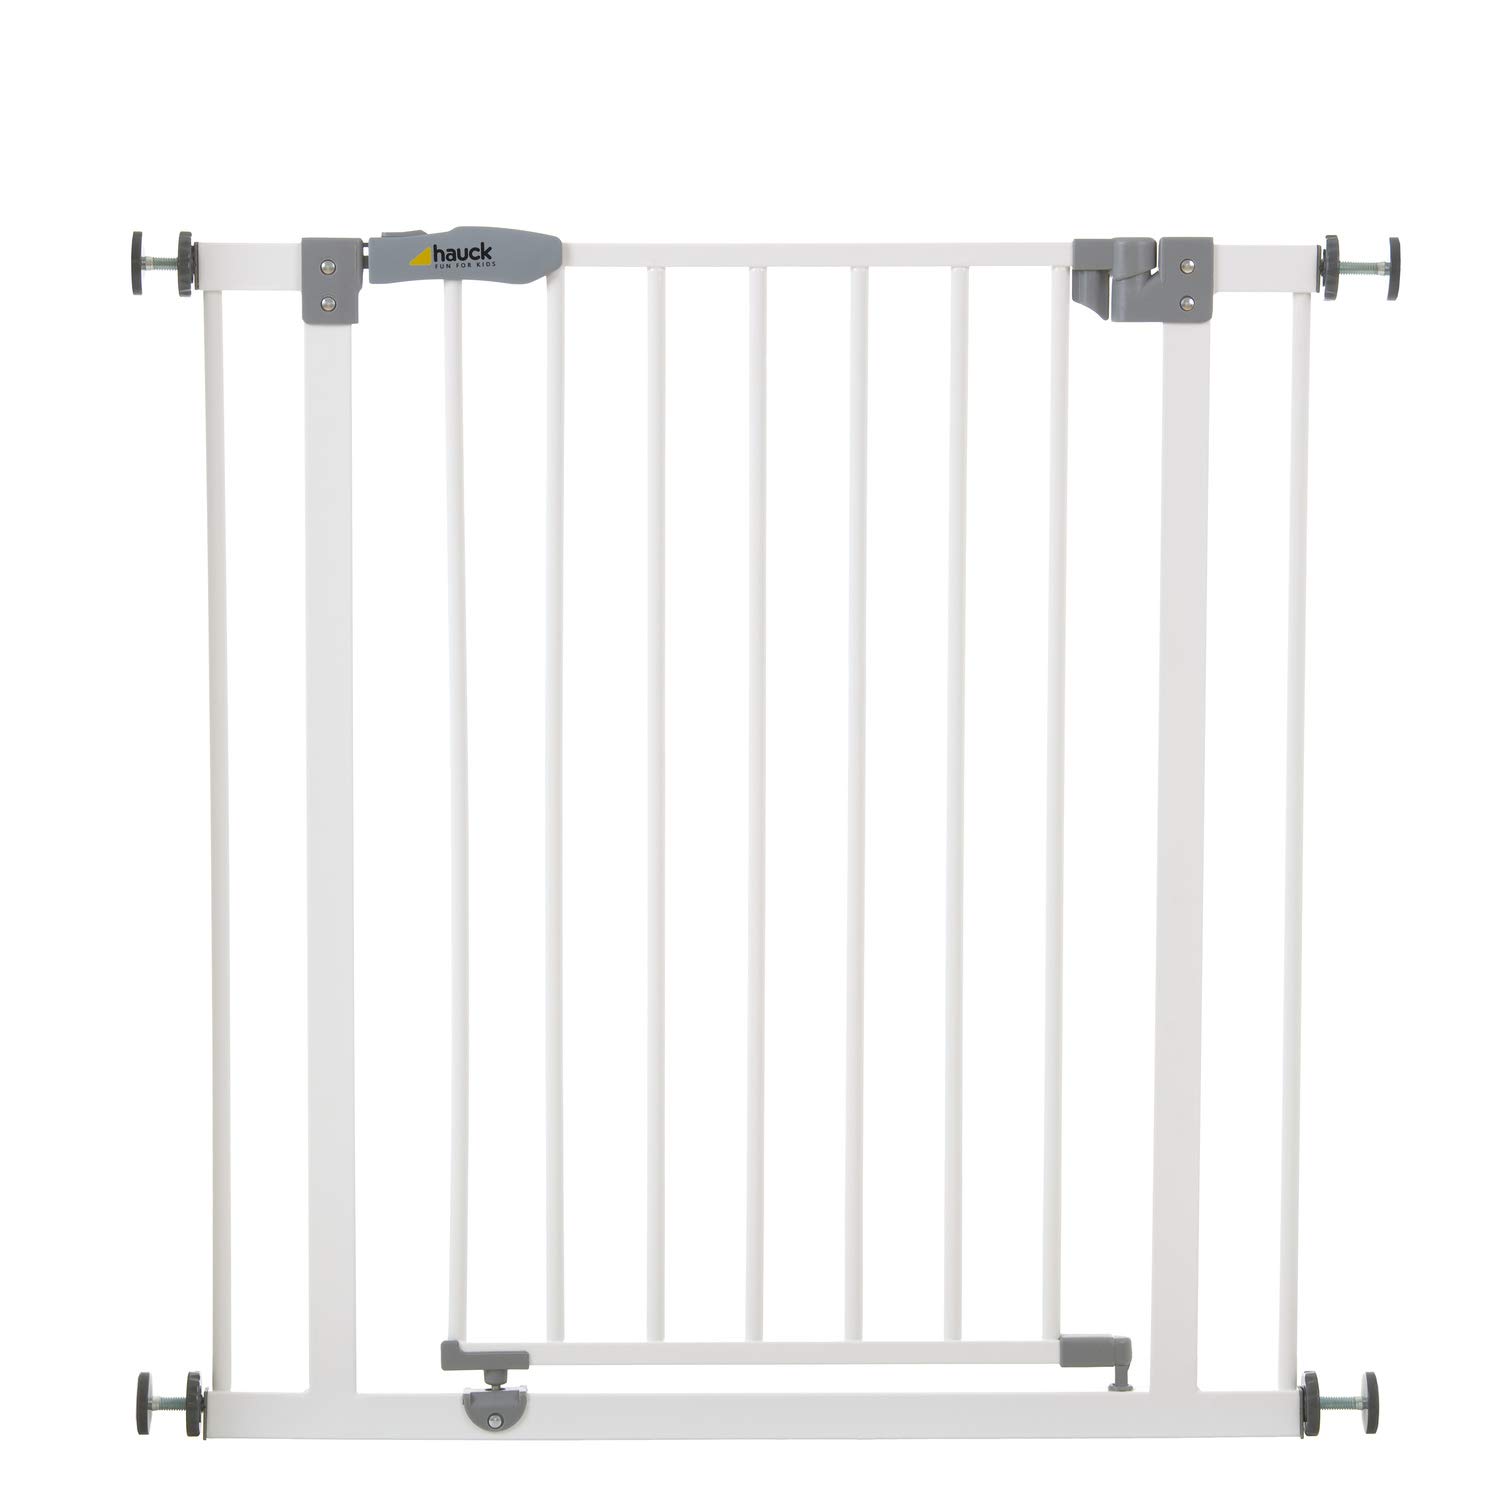 Hauck Open N Stop Pressure Fit Baby and Pet Safety gate, Accommodates 29 to 31 Wide Home Doorway, Stairway, or Hallway, White